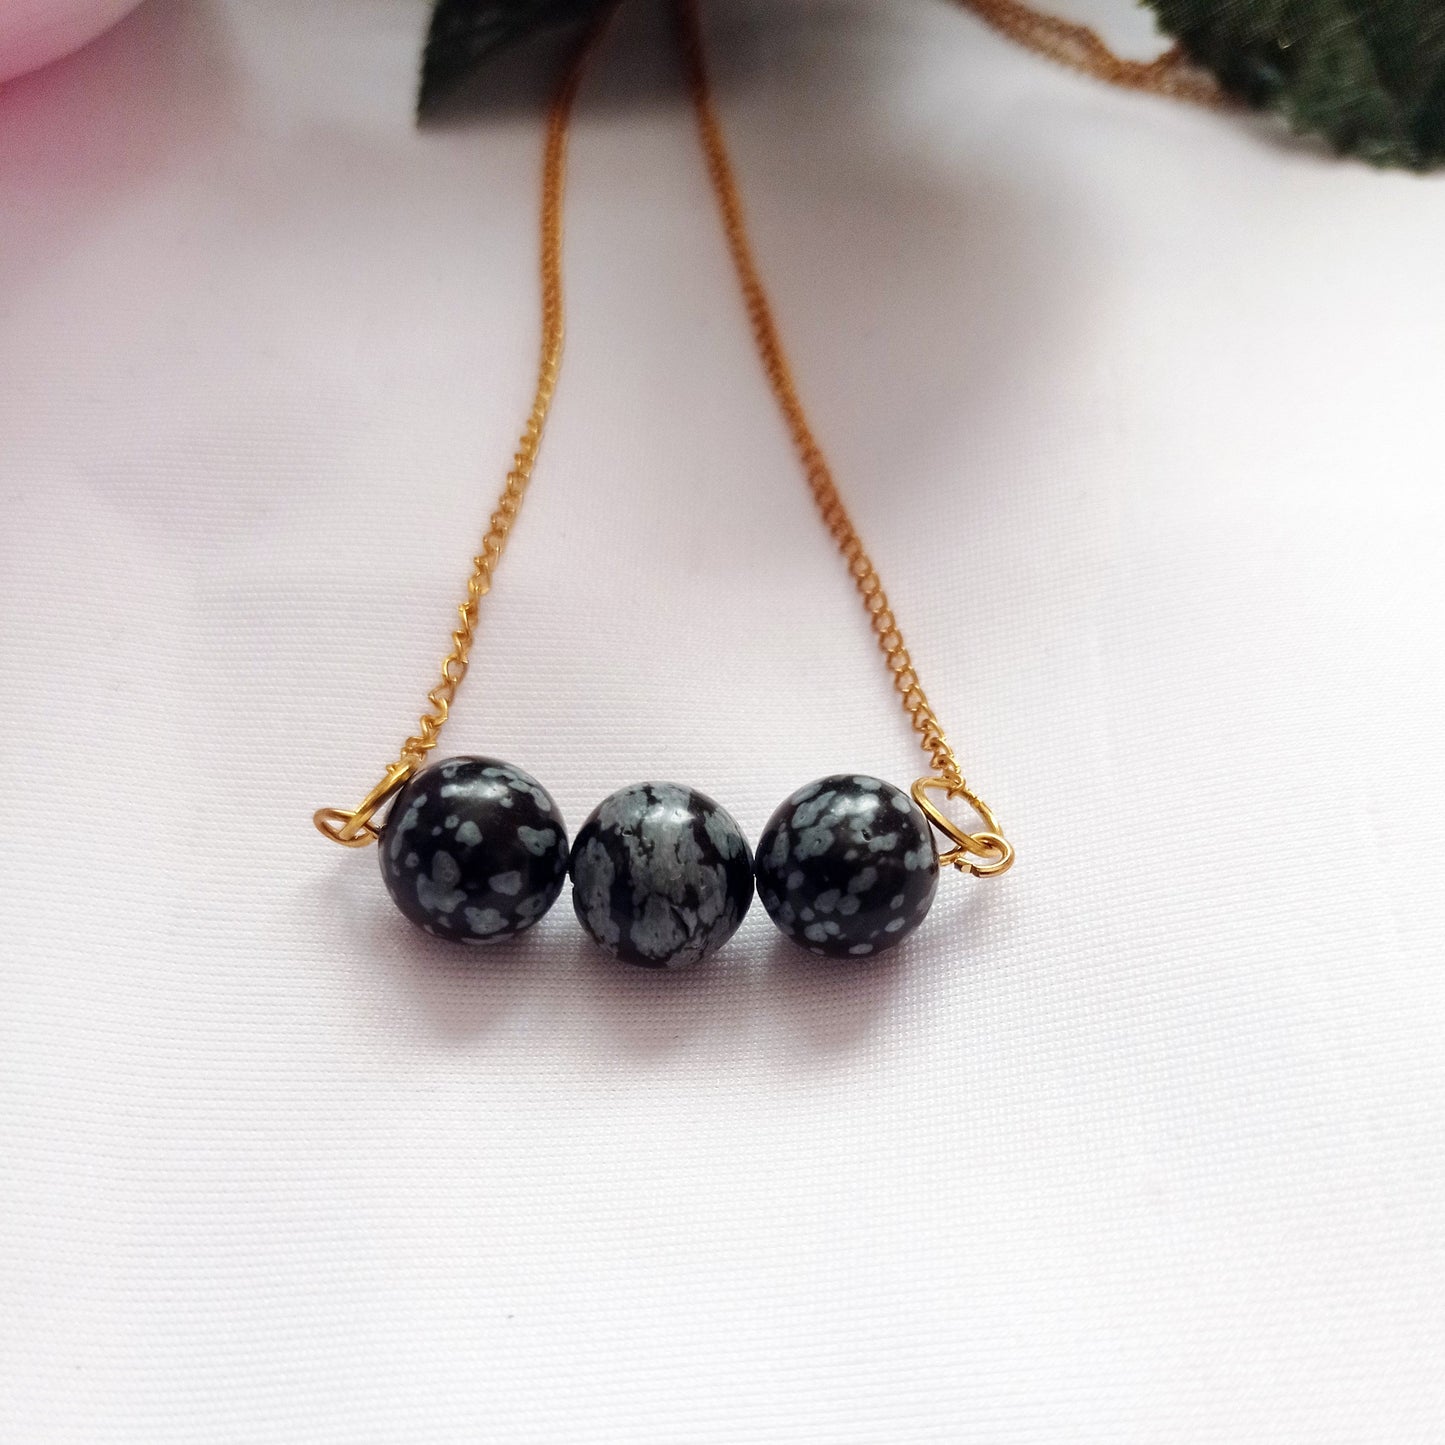 Snowflake Obsidian Yellow Gold Vermeil Necklace, Snowflake Obsidian Bar Necklace, Gemstone Bar Necklace, Pendant Necklace | by nlanlaVictory-3